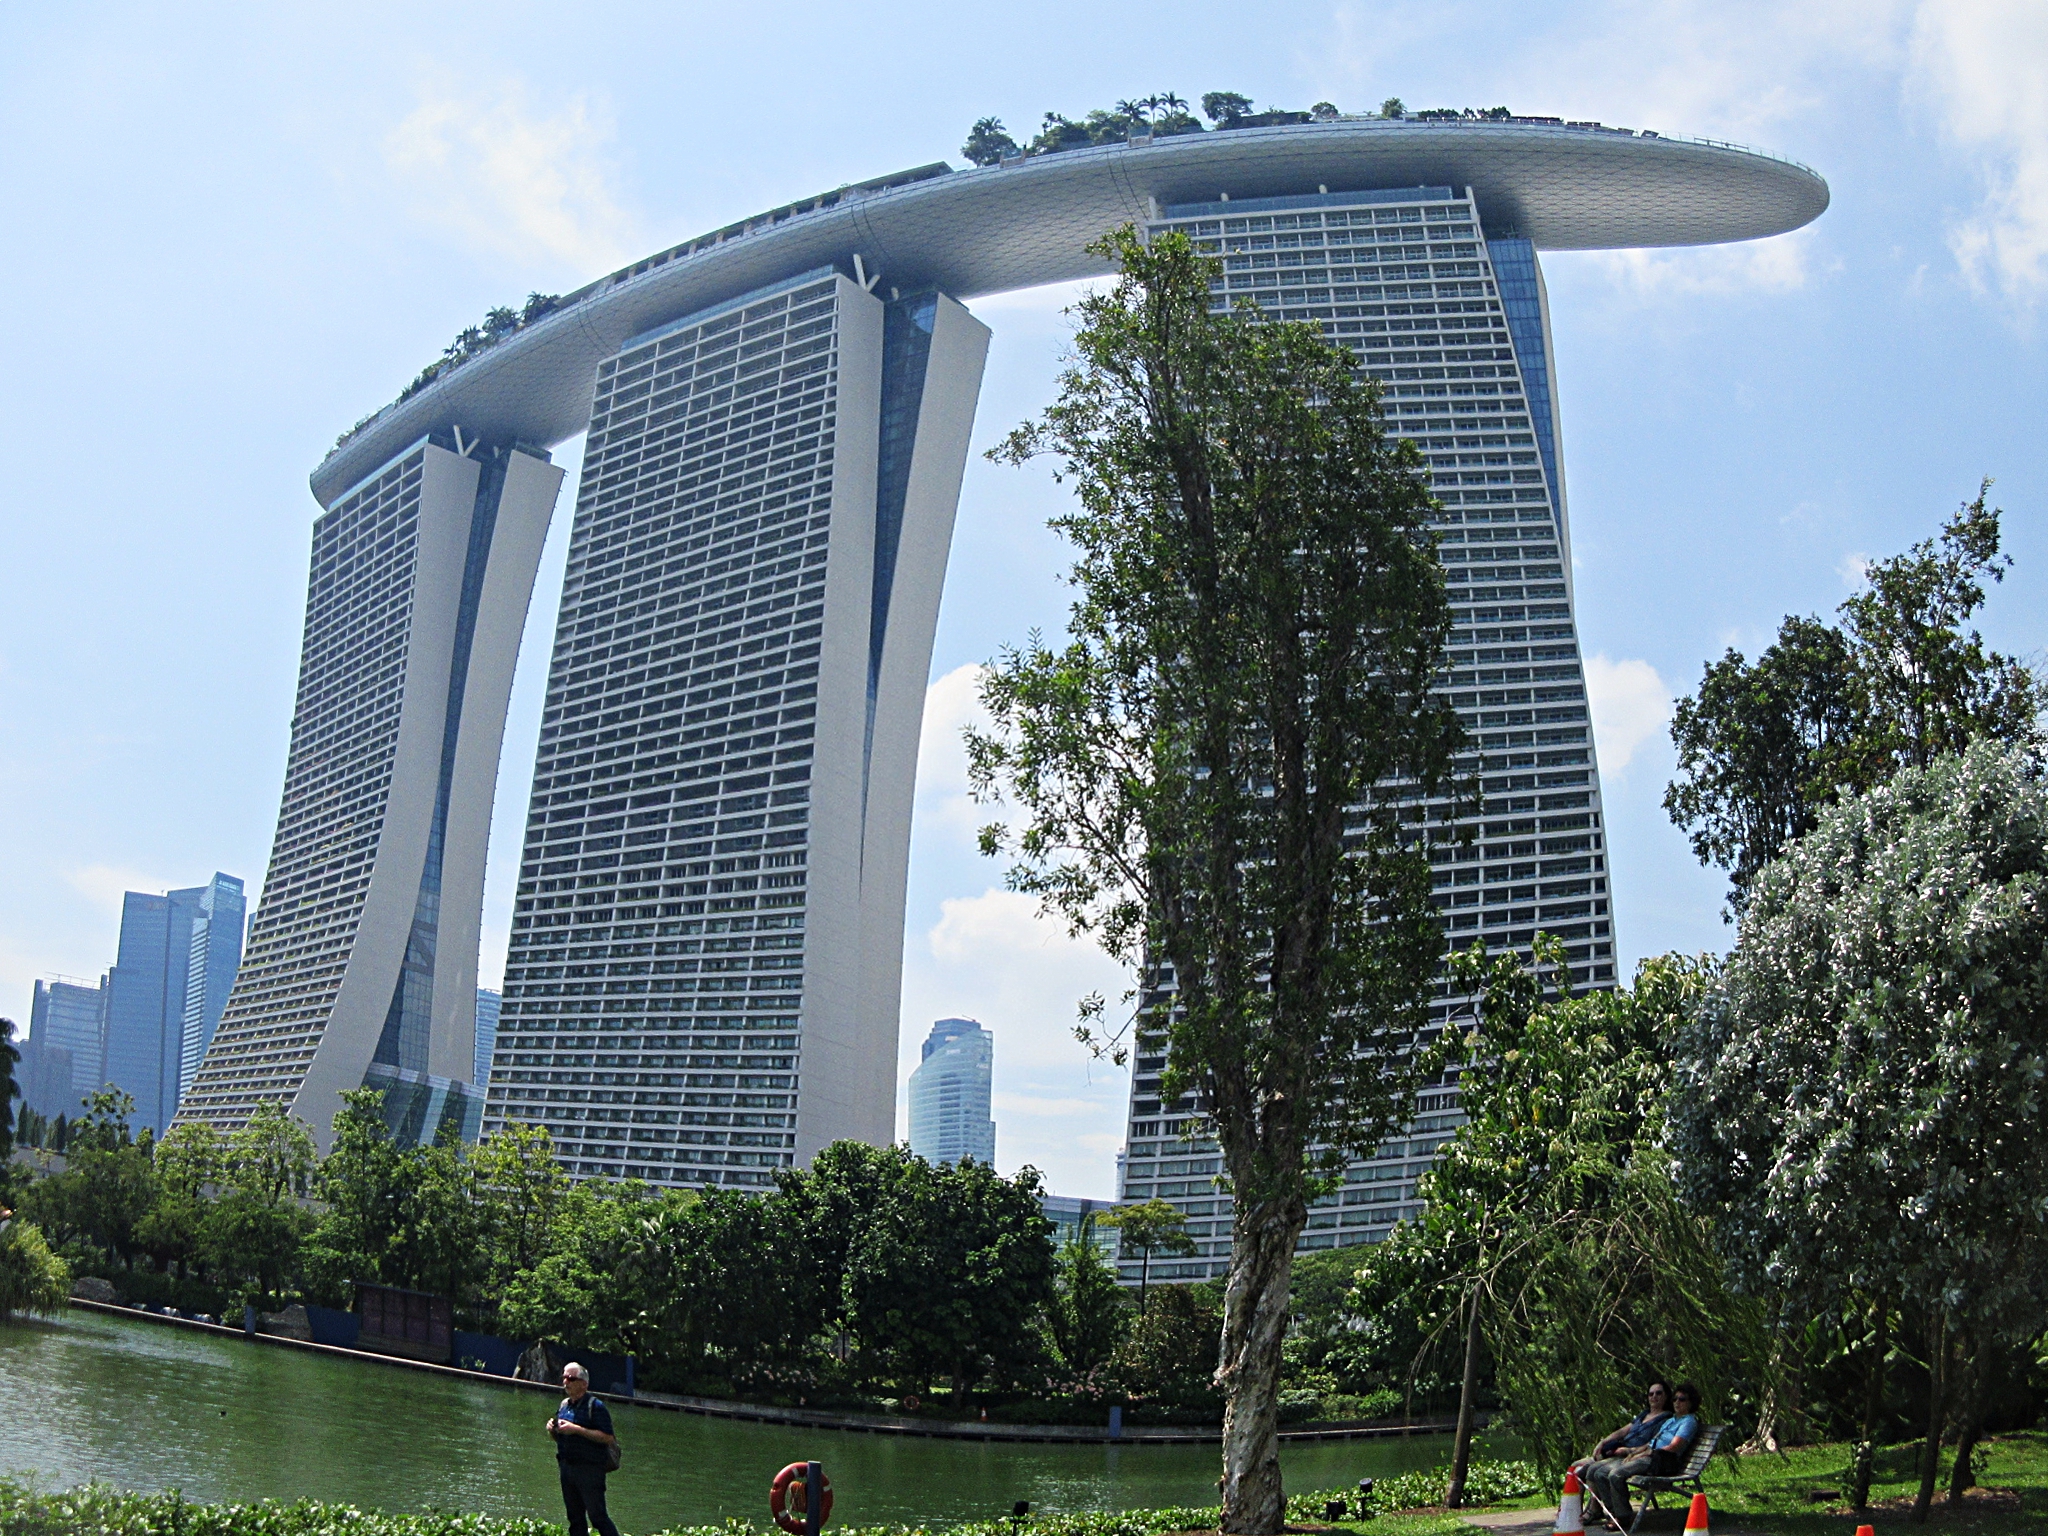 Marina Bay Sands: A one-stop-shop for Luxury and Extravagance